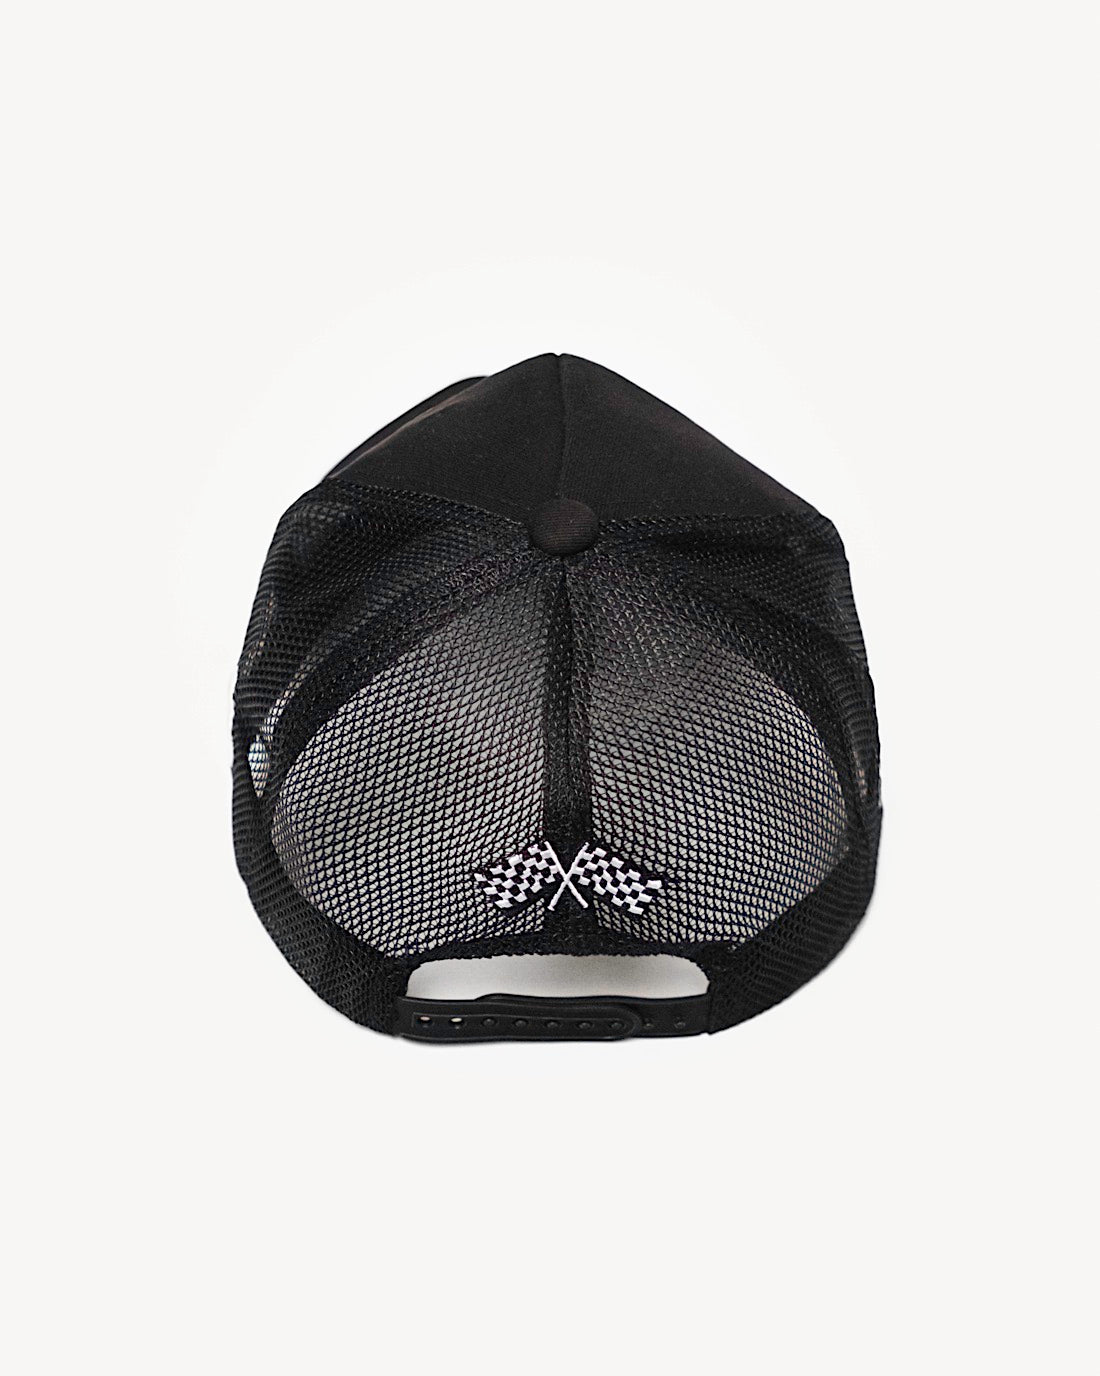 Rear view of a stylish black snapback hat showcasing cooling and comfy mesh design with racing-inspired patches.